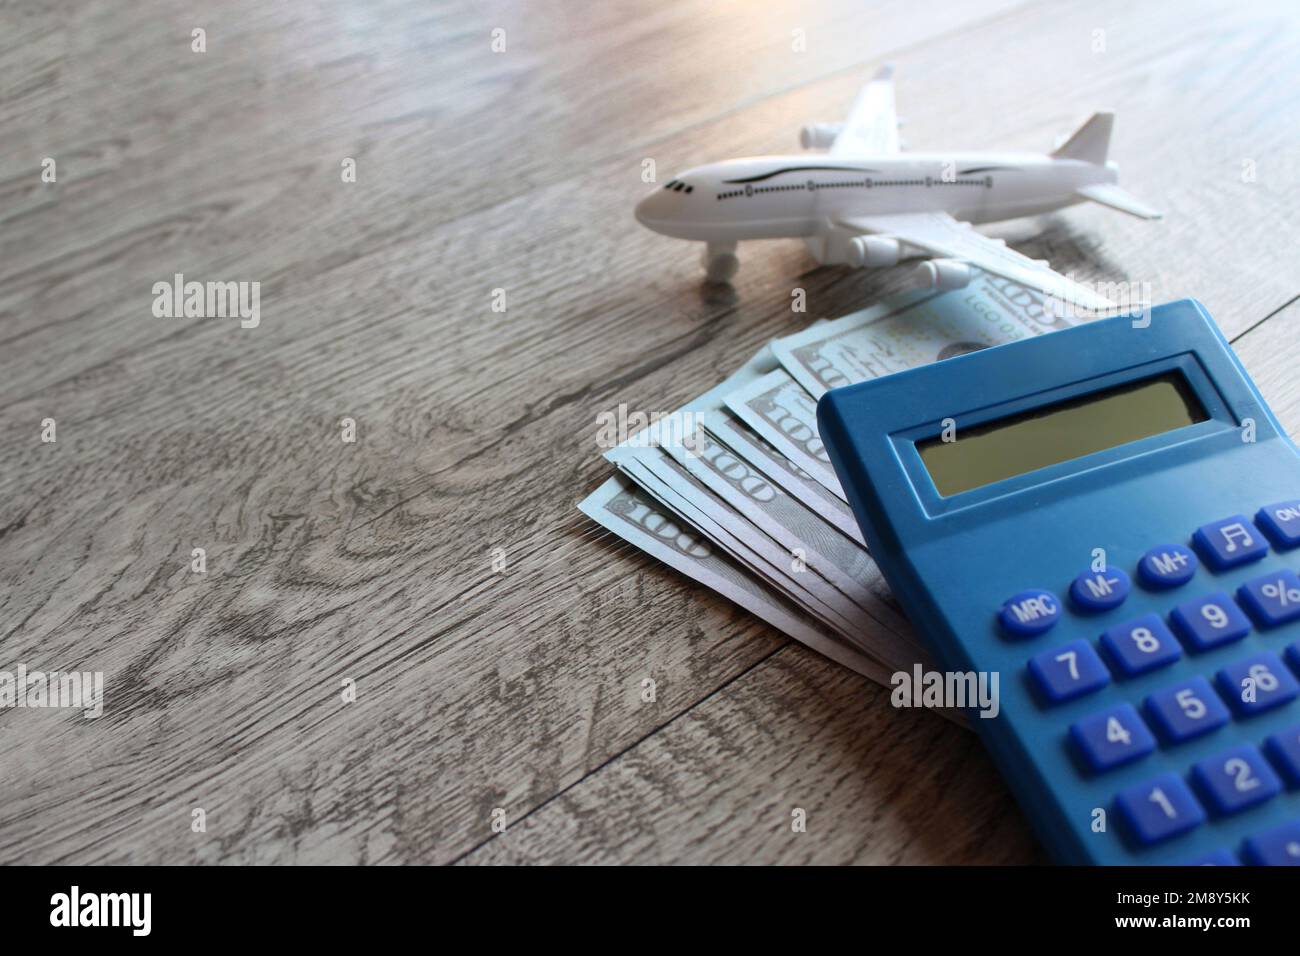 Toy plane, money and calculator on wooden table with copy space. Travel and transportation concept Stock Photo